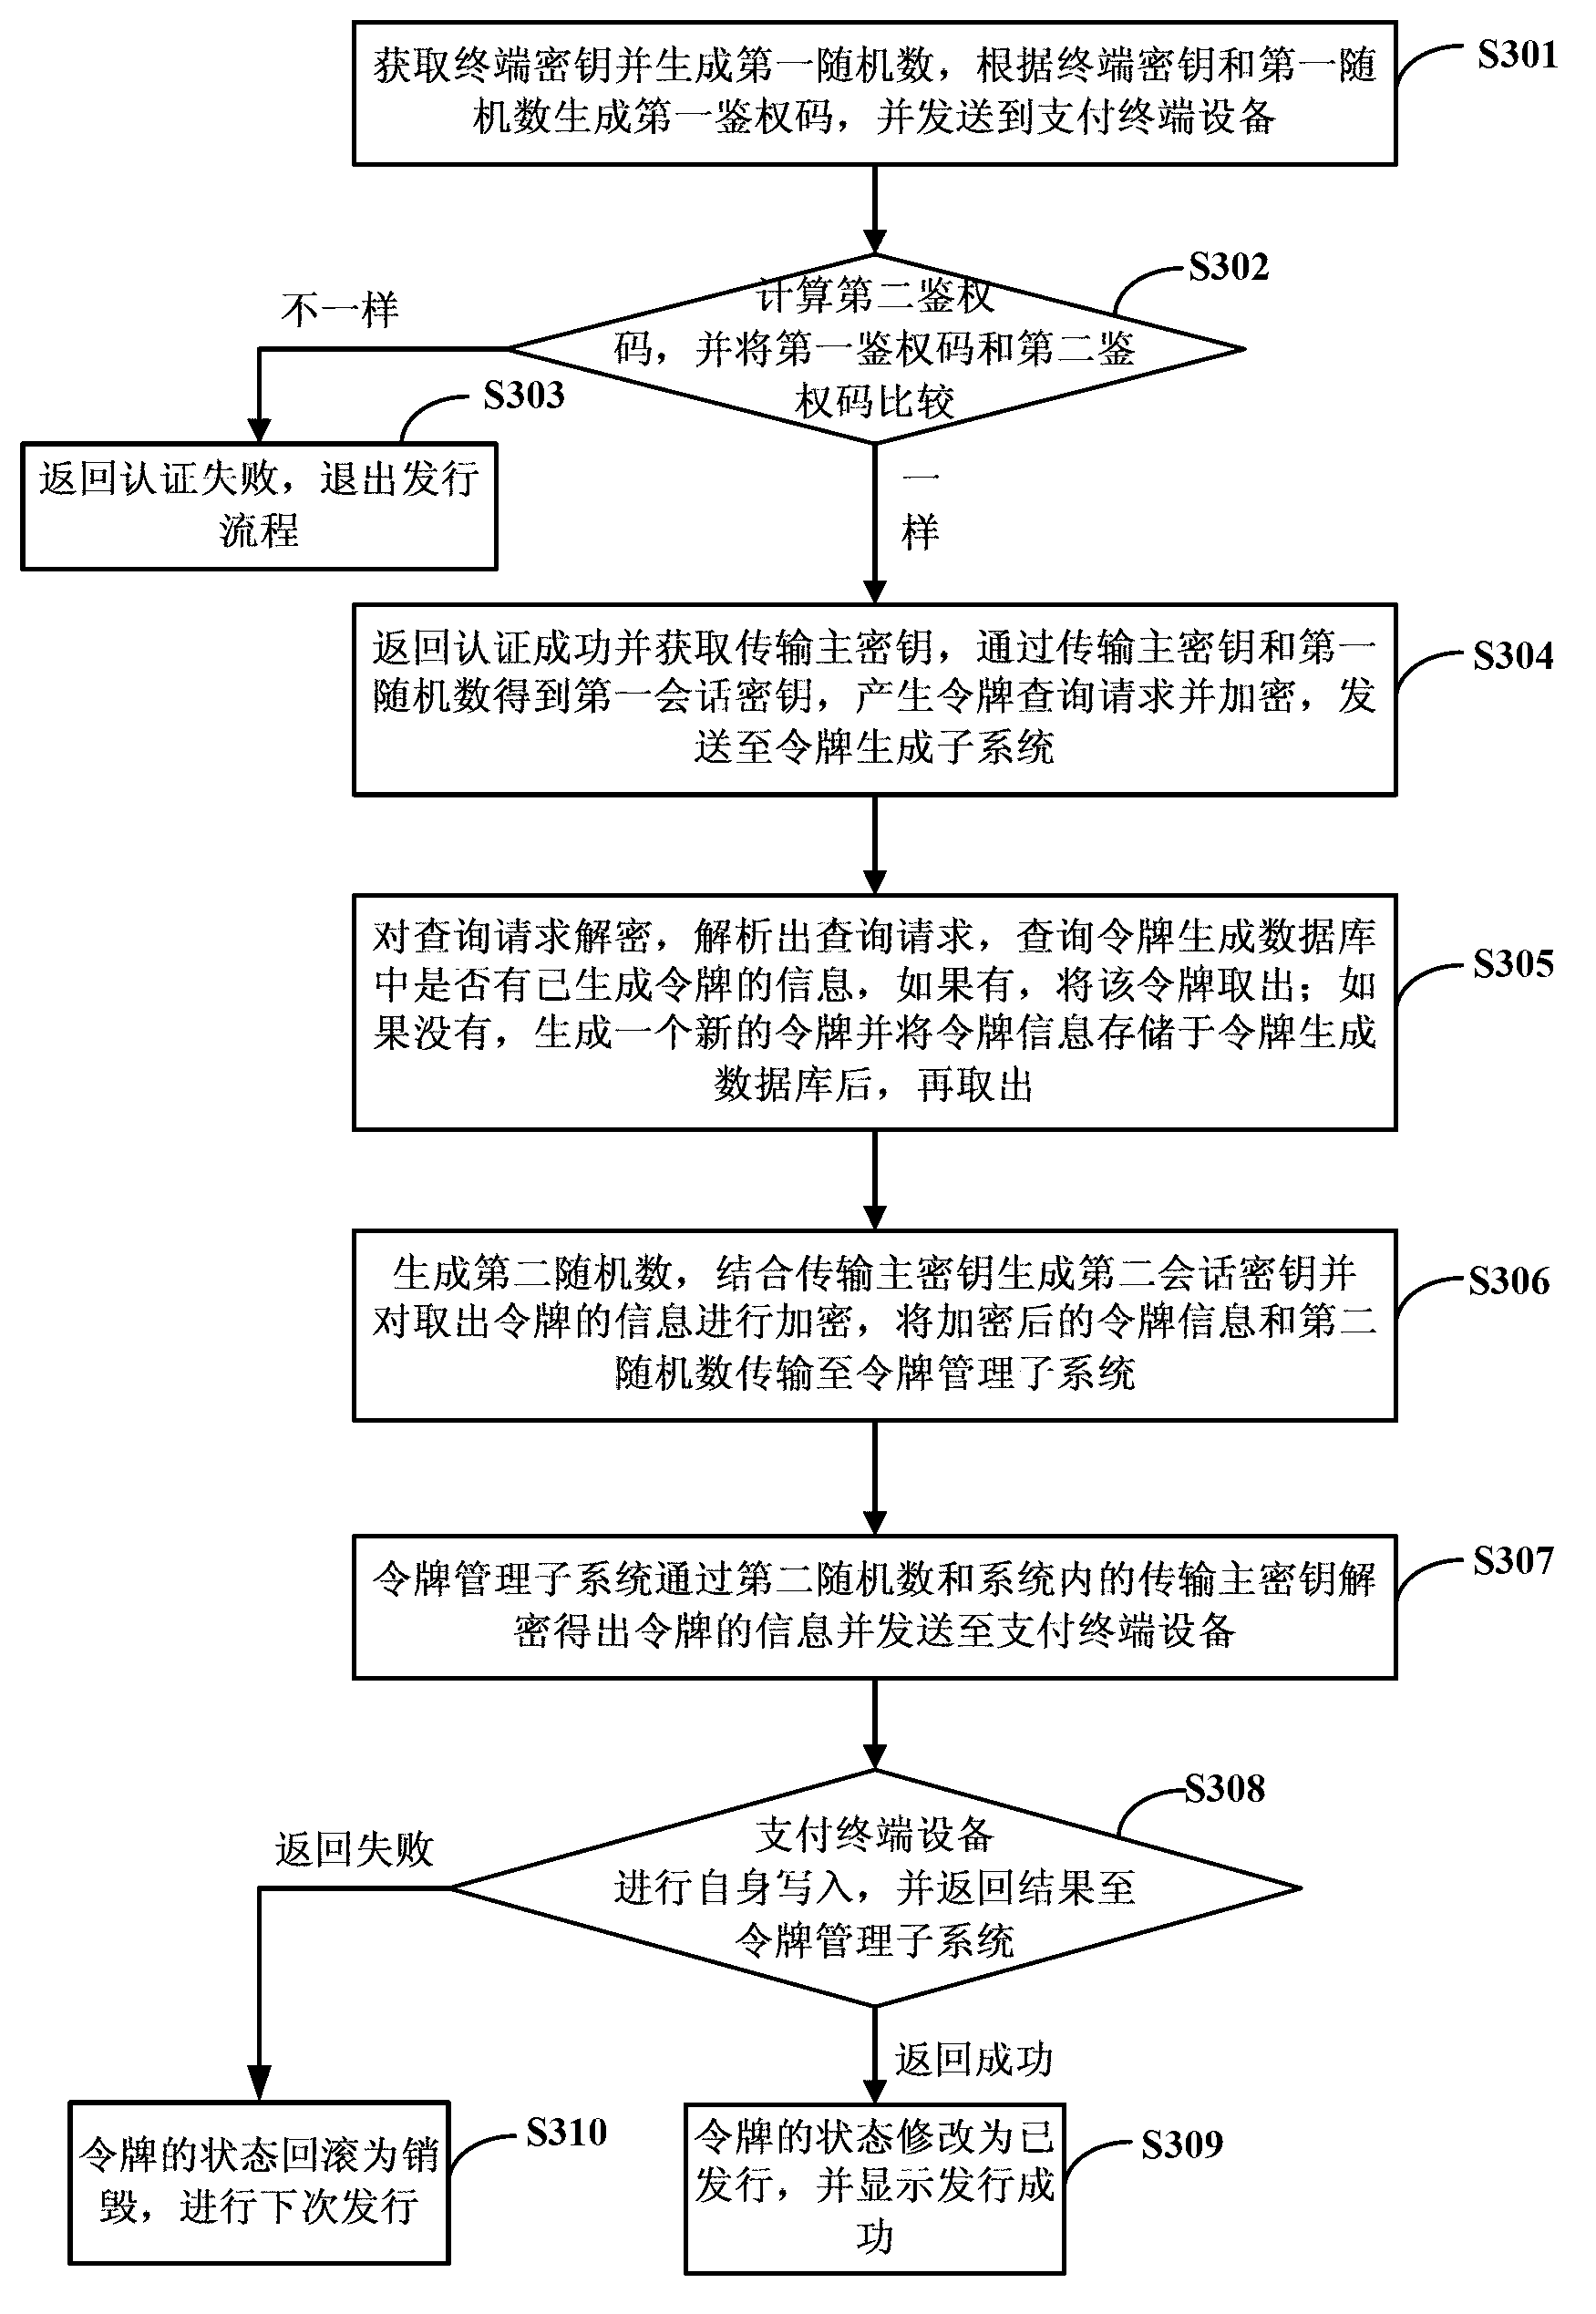 Security verification system based on distributed network transaction